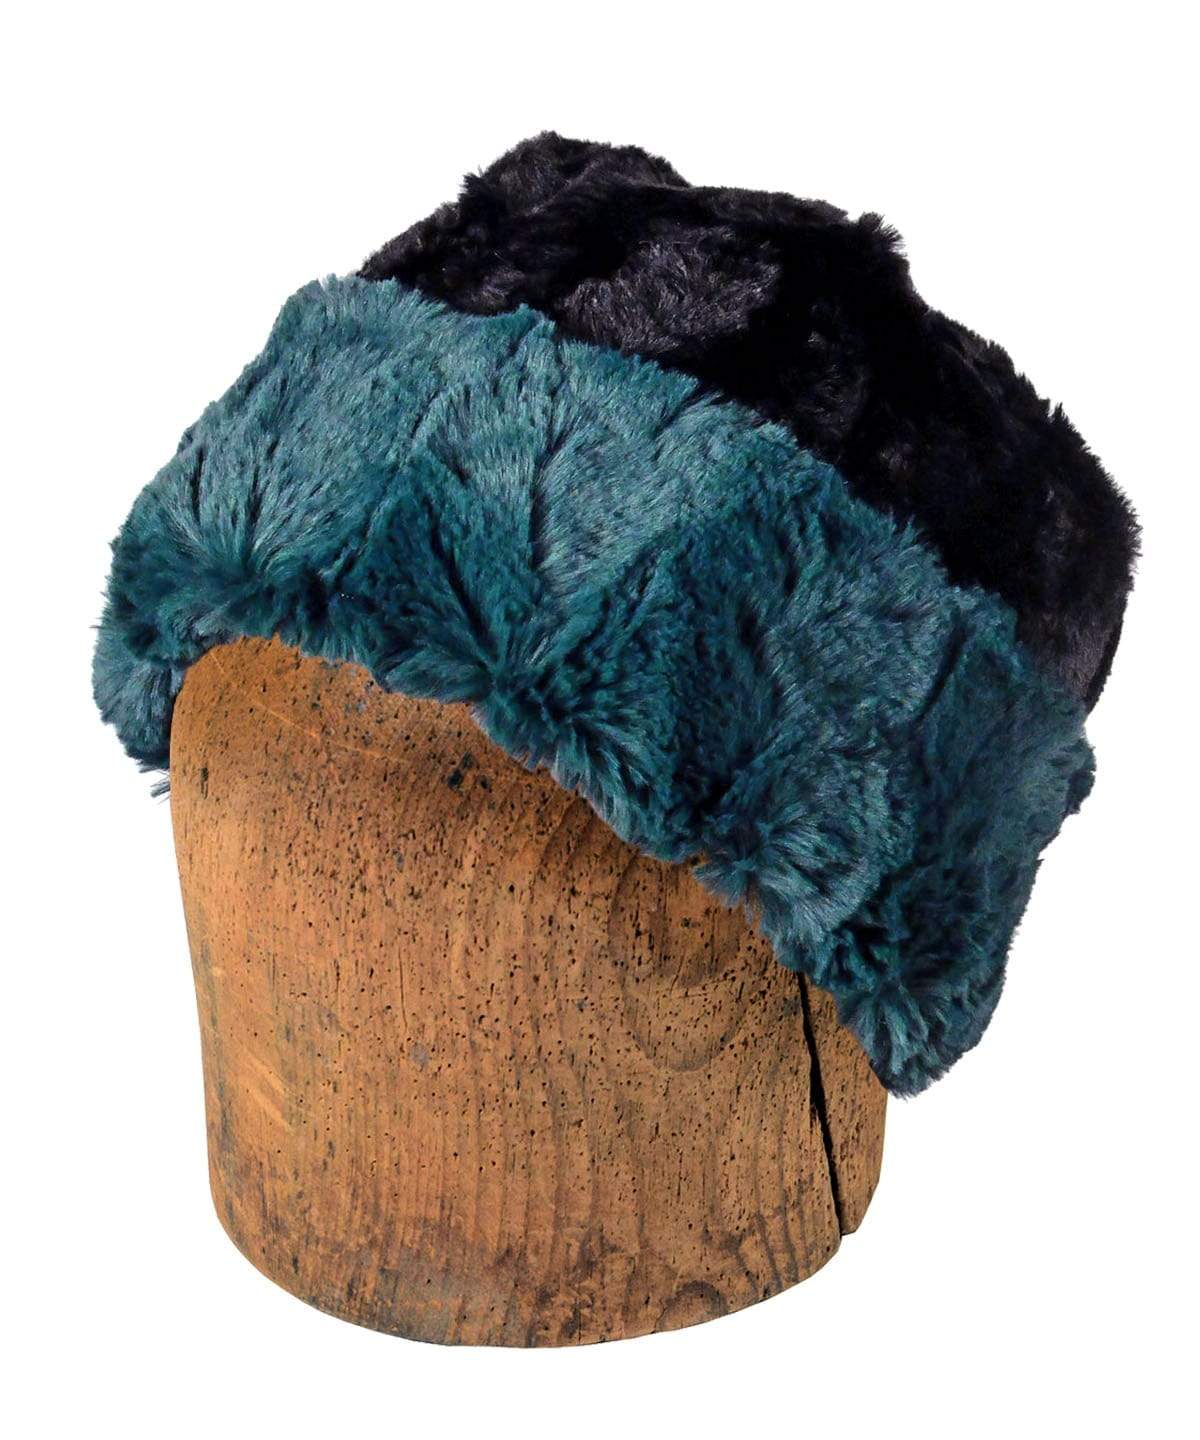 Men's Beanie Hat with Black Pom, Reversible | Peacock Teal Faux Fur | Handmade in the USA by Pandemonium Seattle